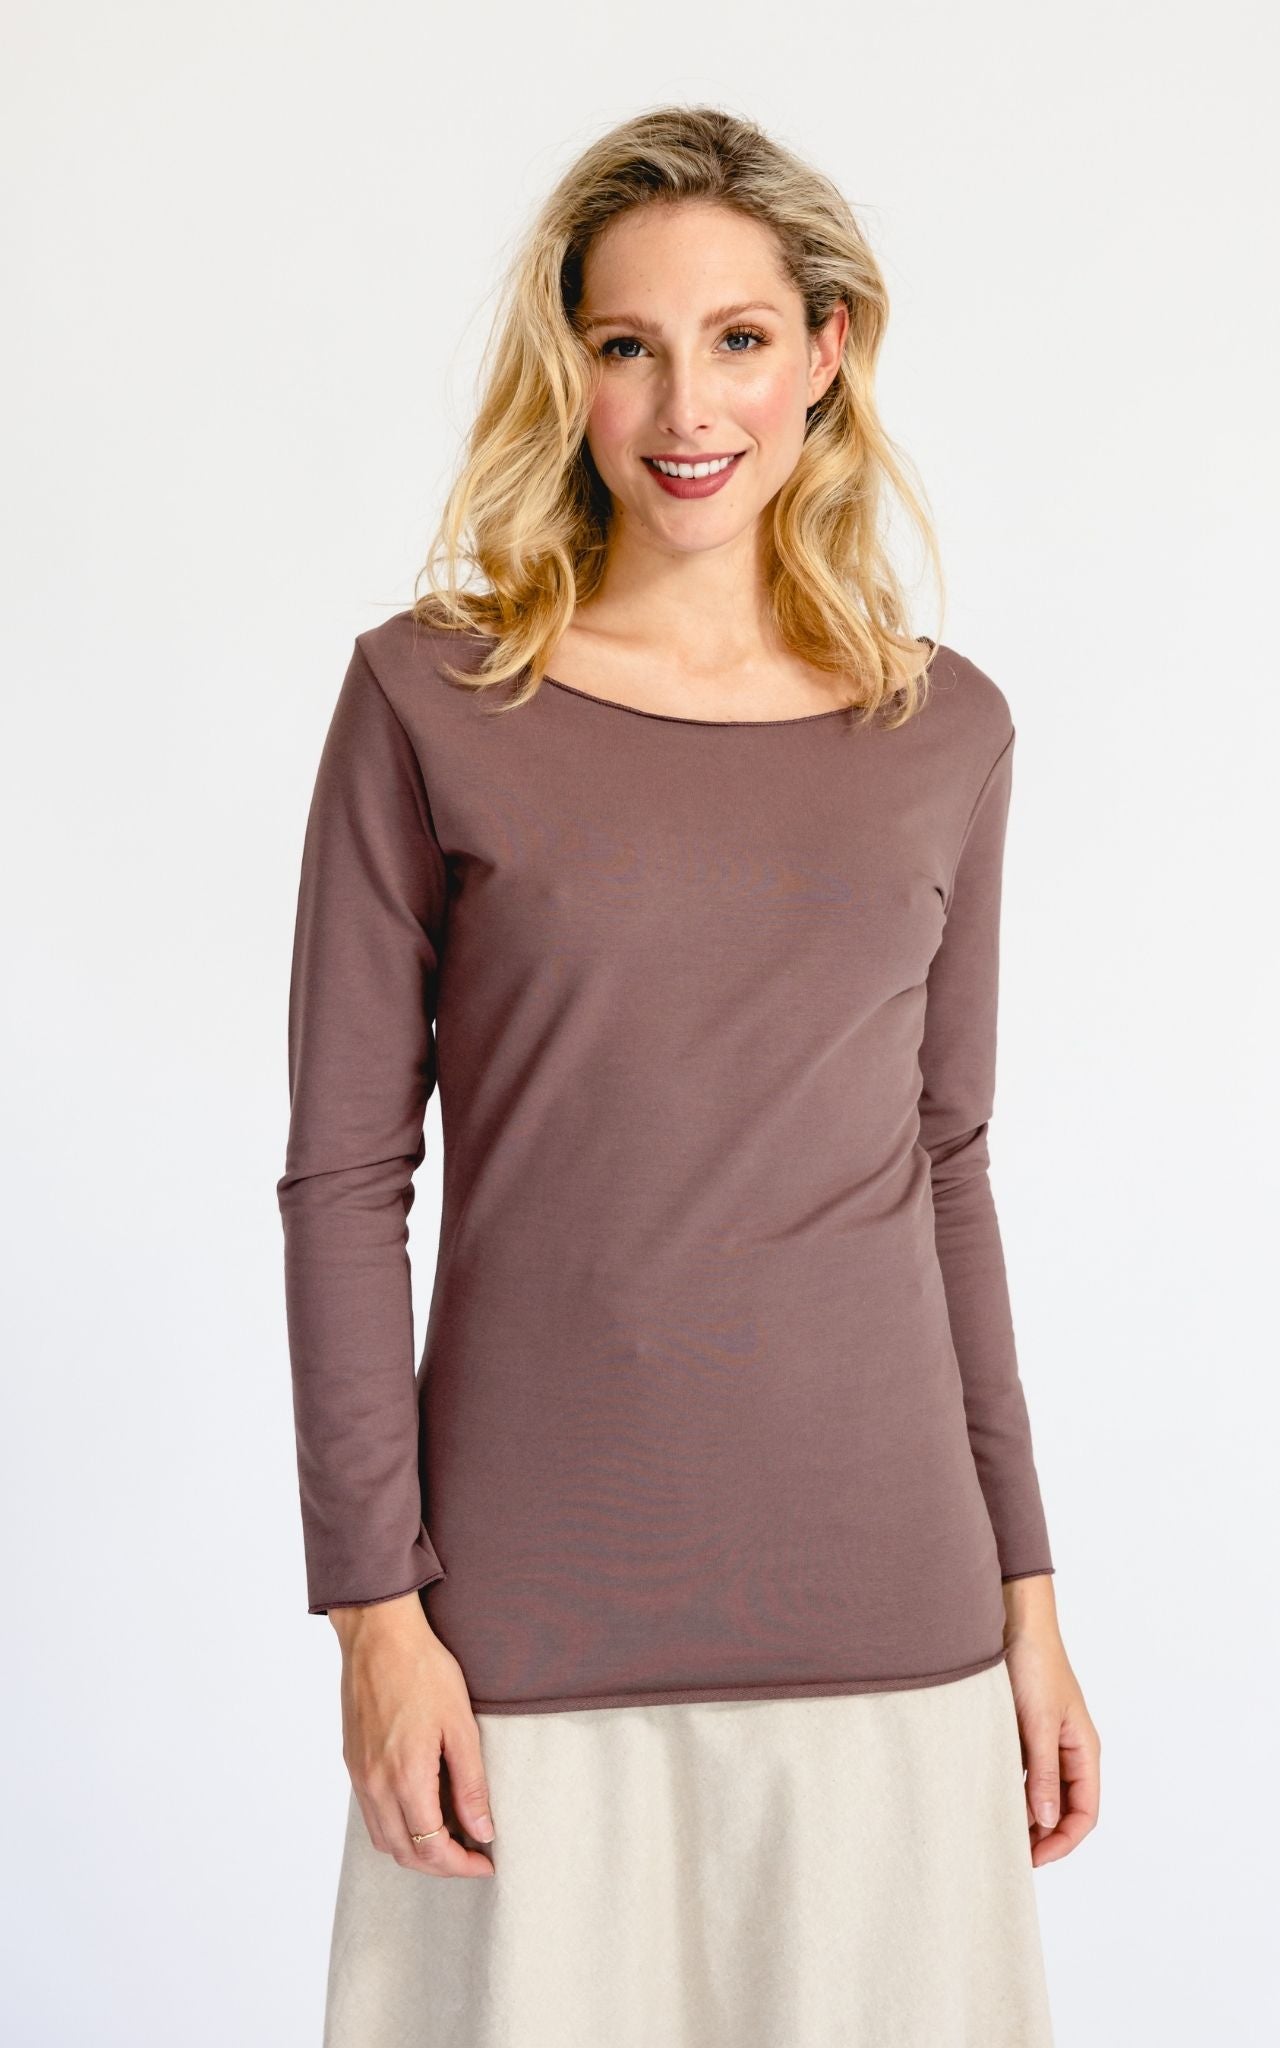 Surya Organic Cotton 'Isiolo' Top made in Nepal